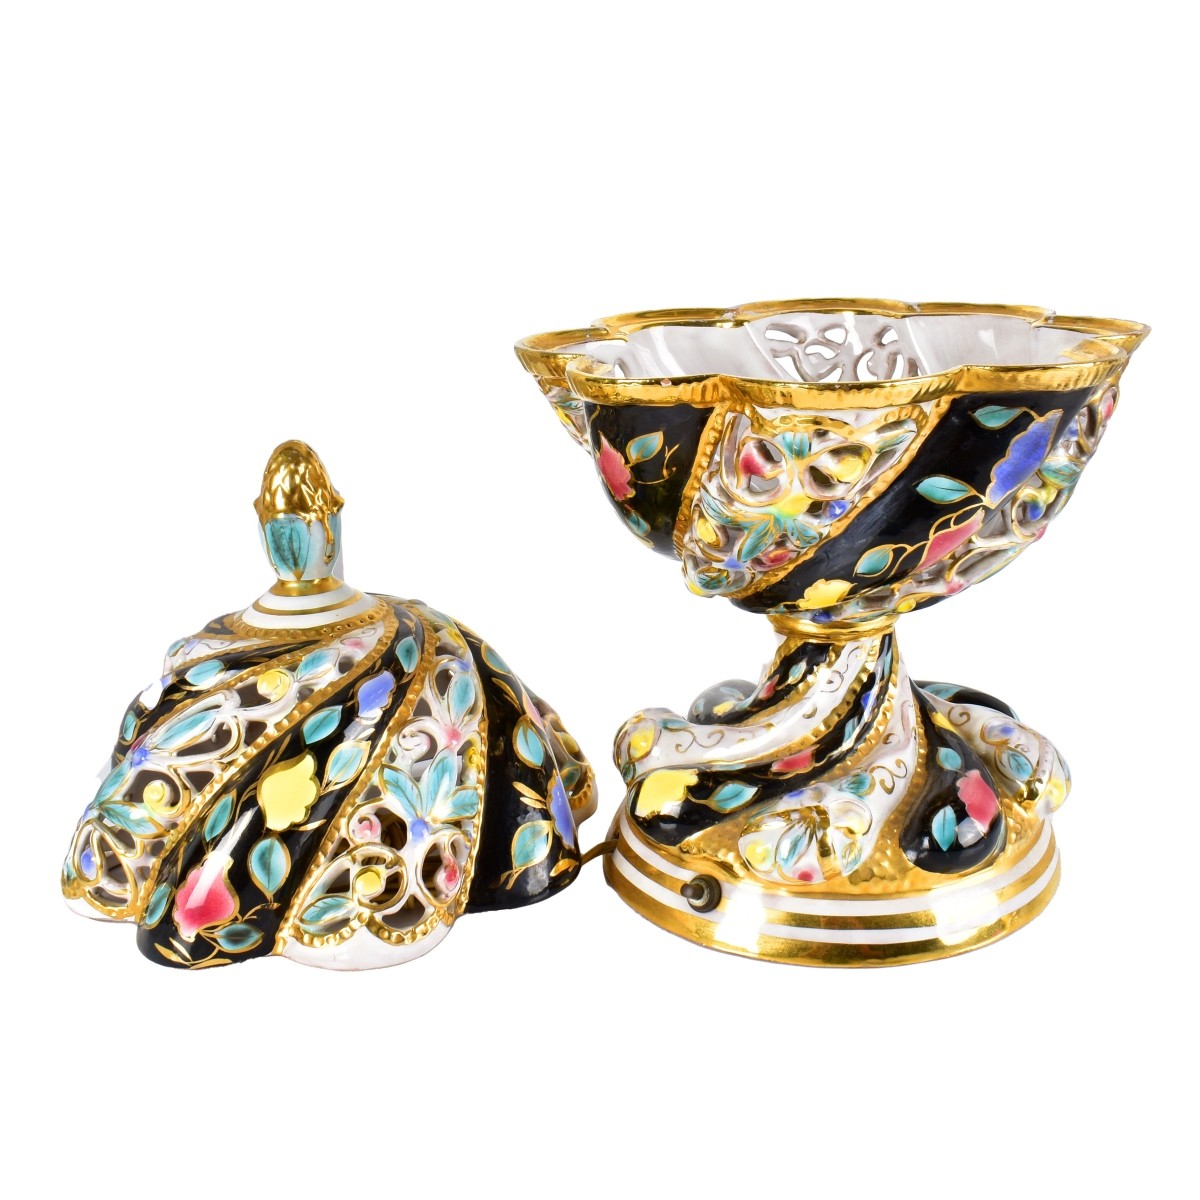 Italian Painted Pottery Lamps